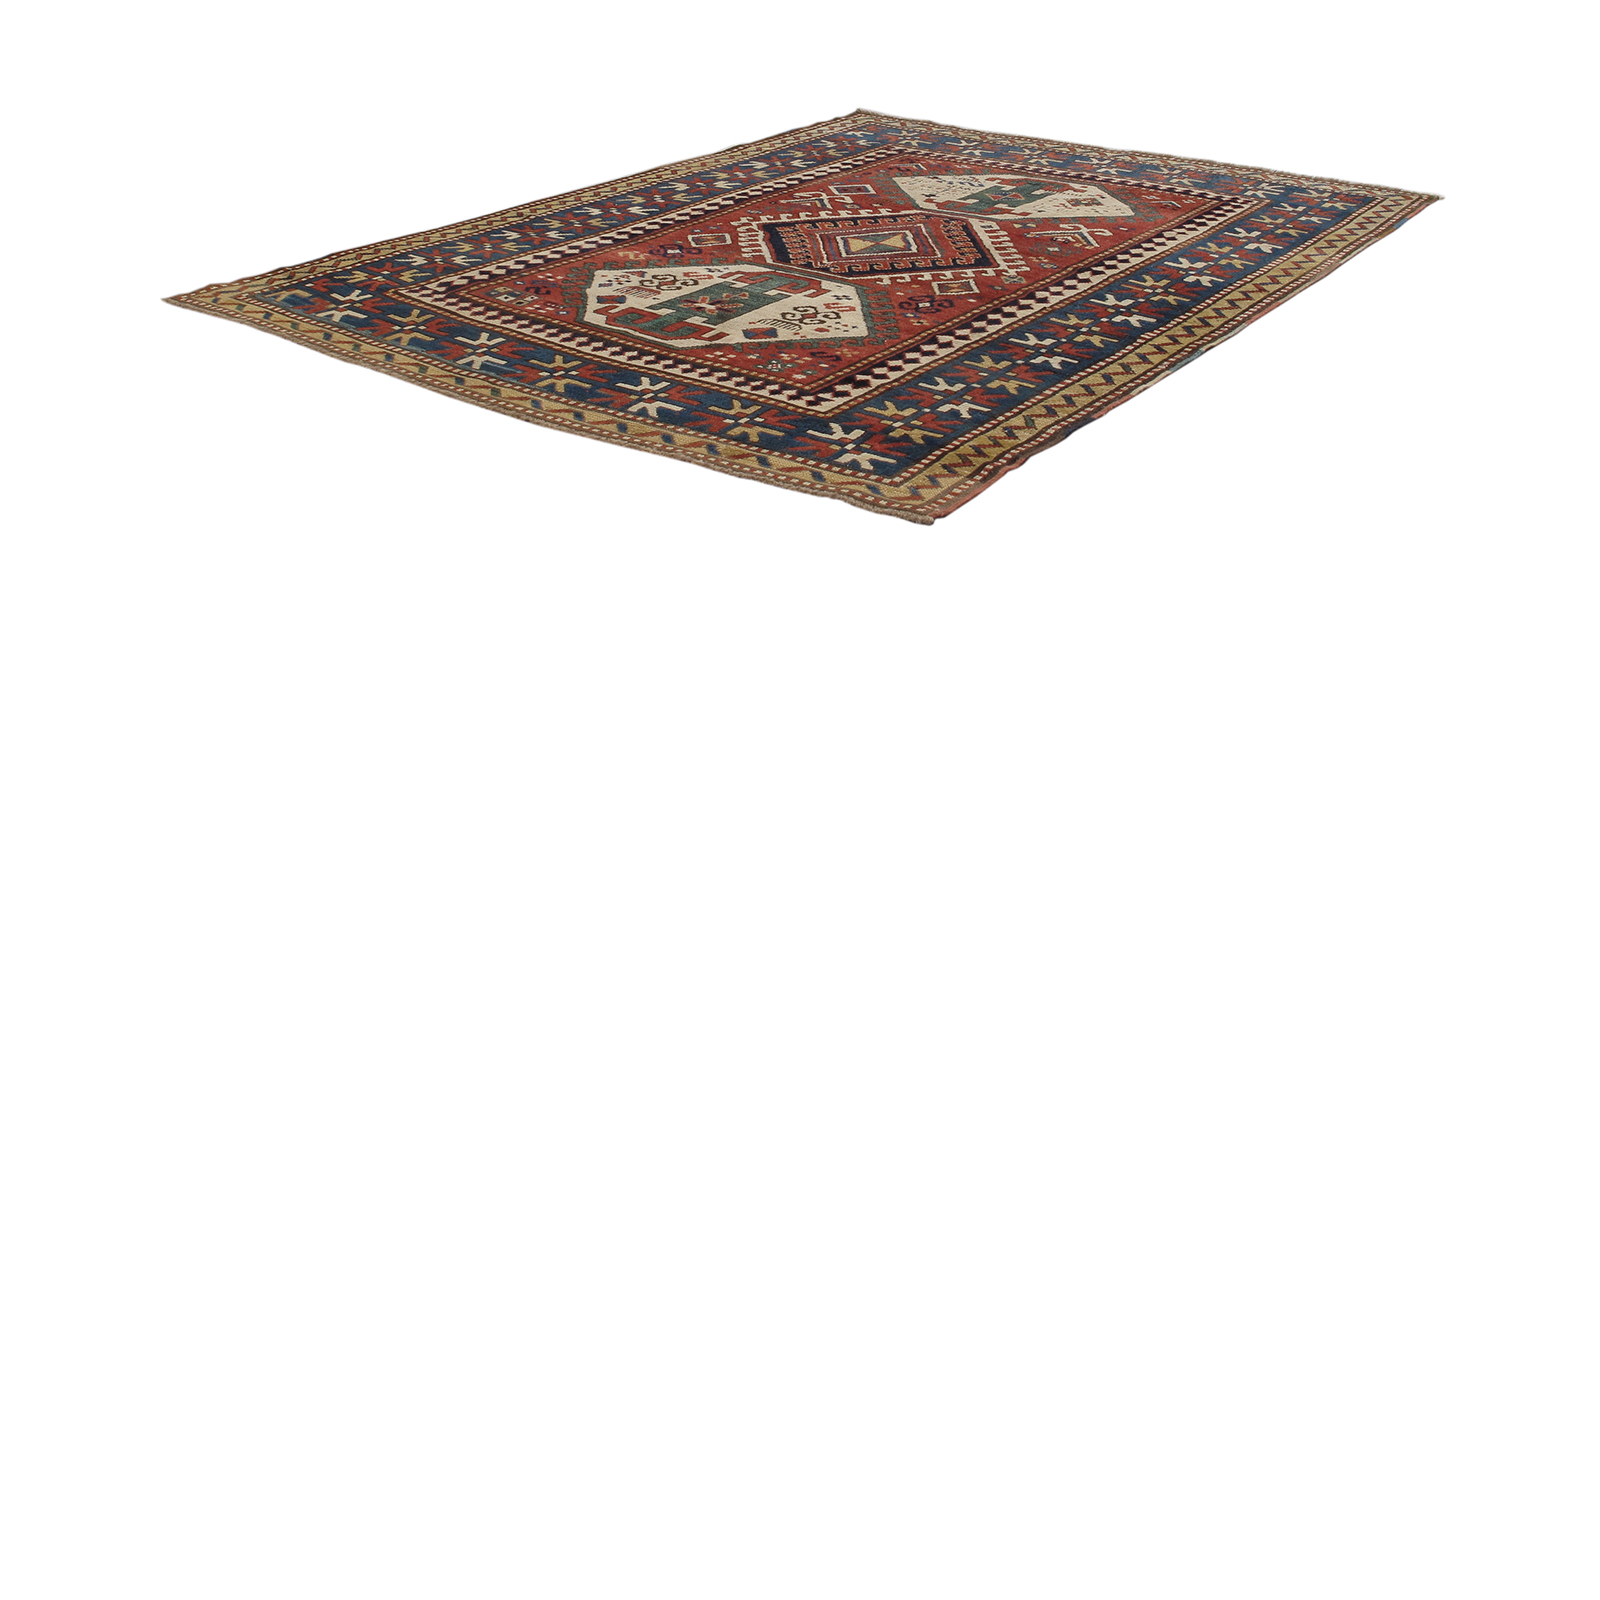 This Kazak rug is hand-knotted and made of 100% wool.